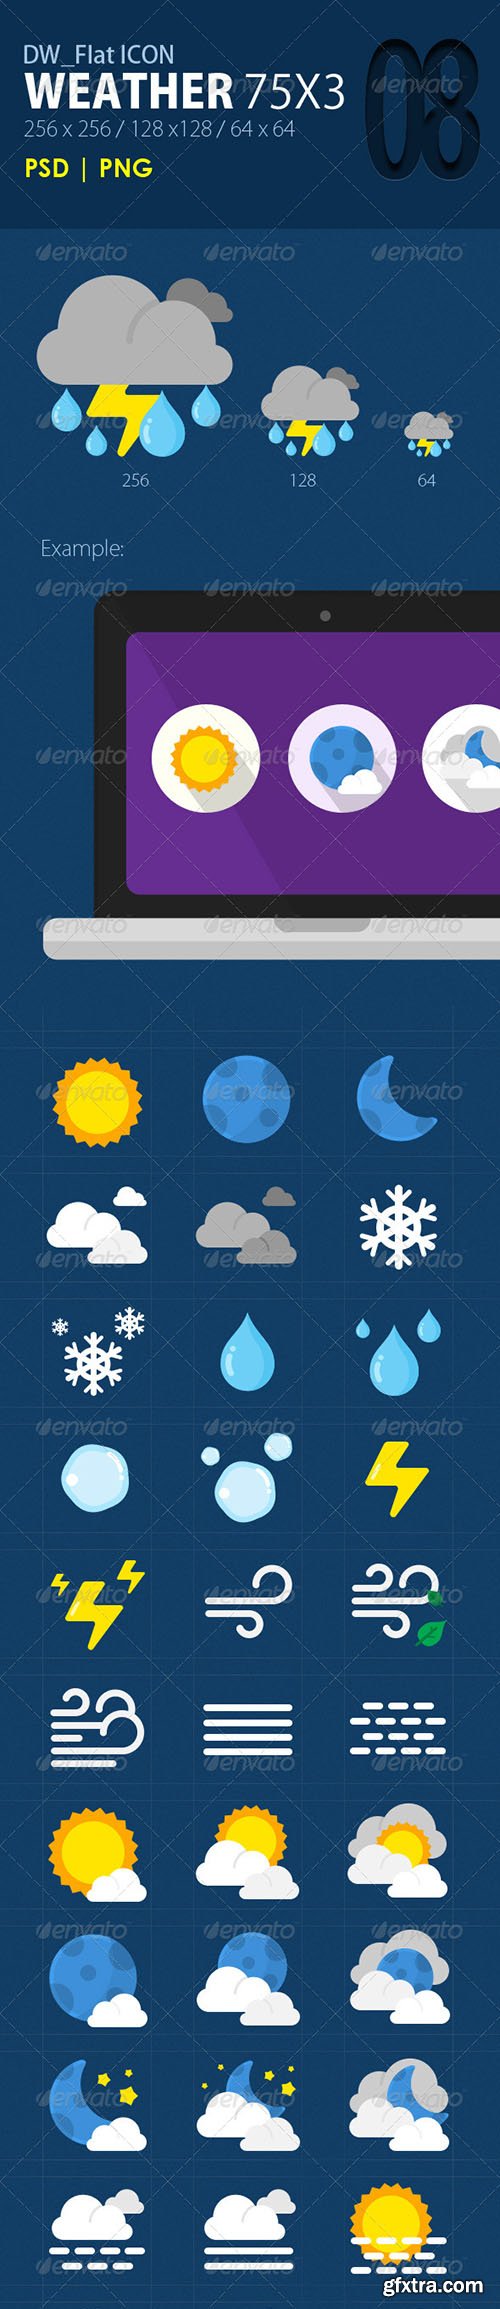 GraphicRiver 75 Flat ICONs (Weather) 5964356